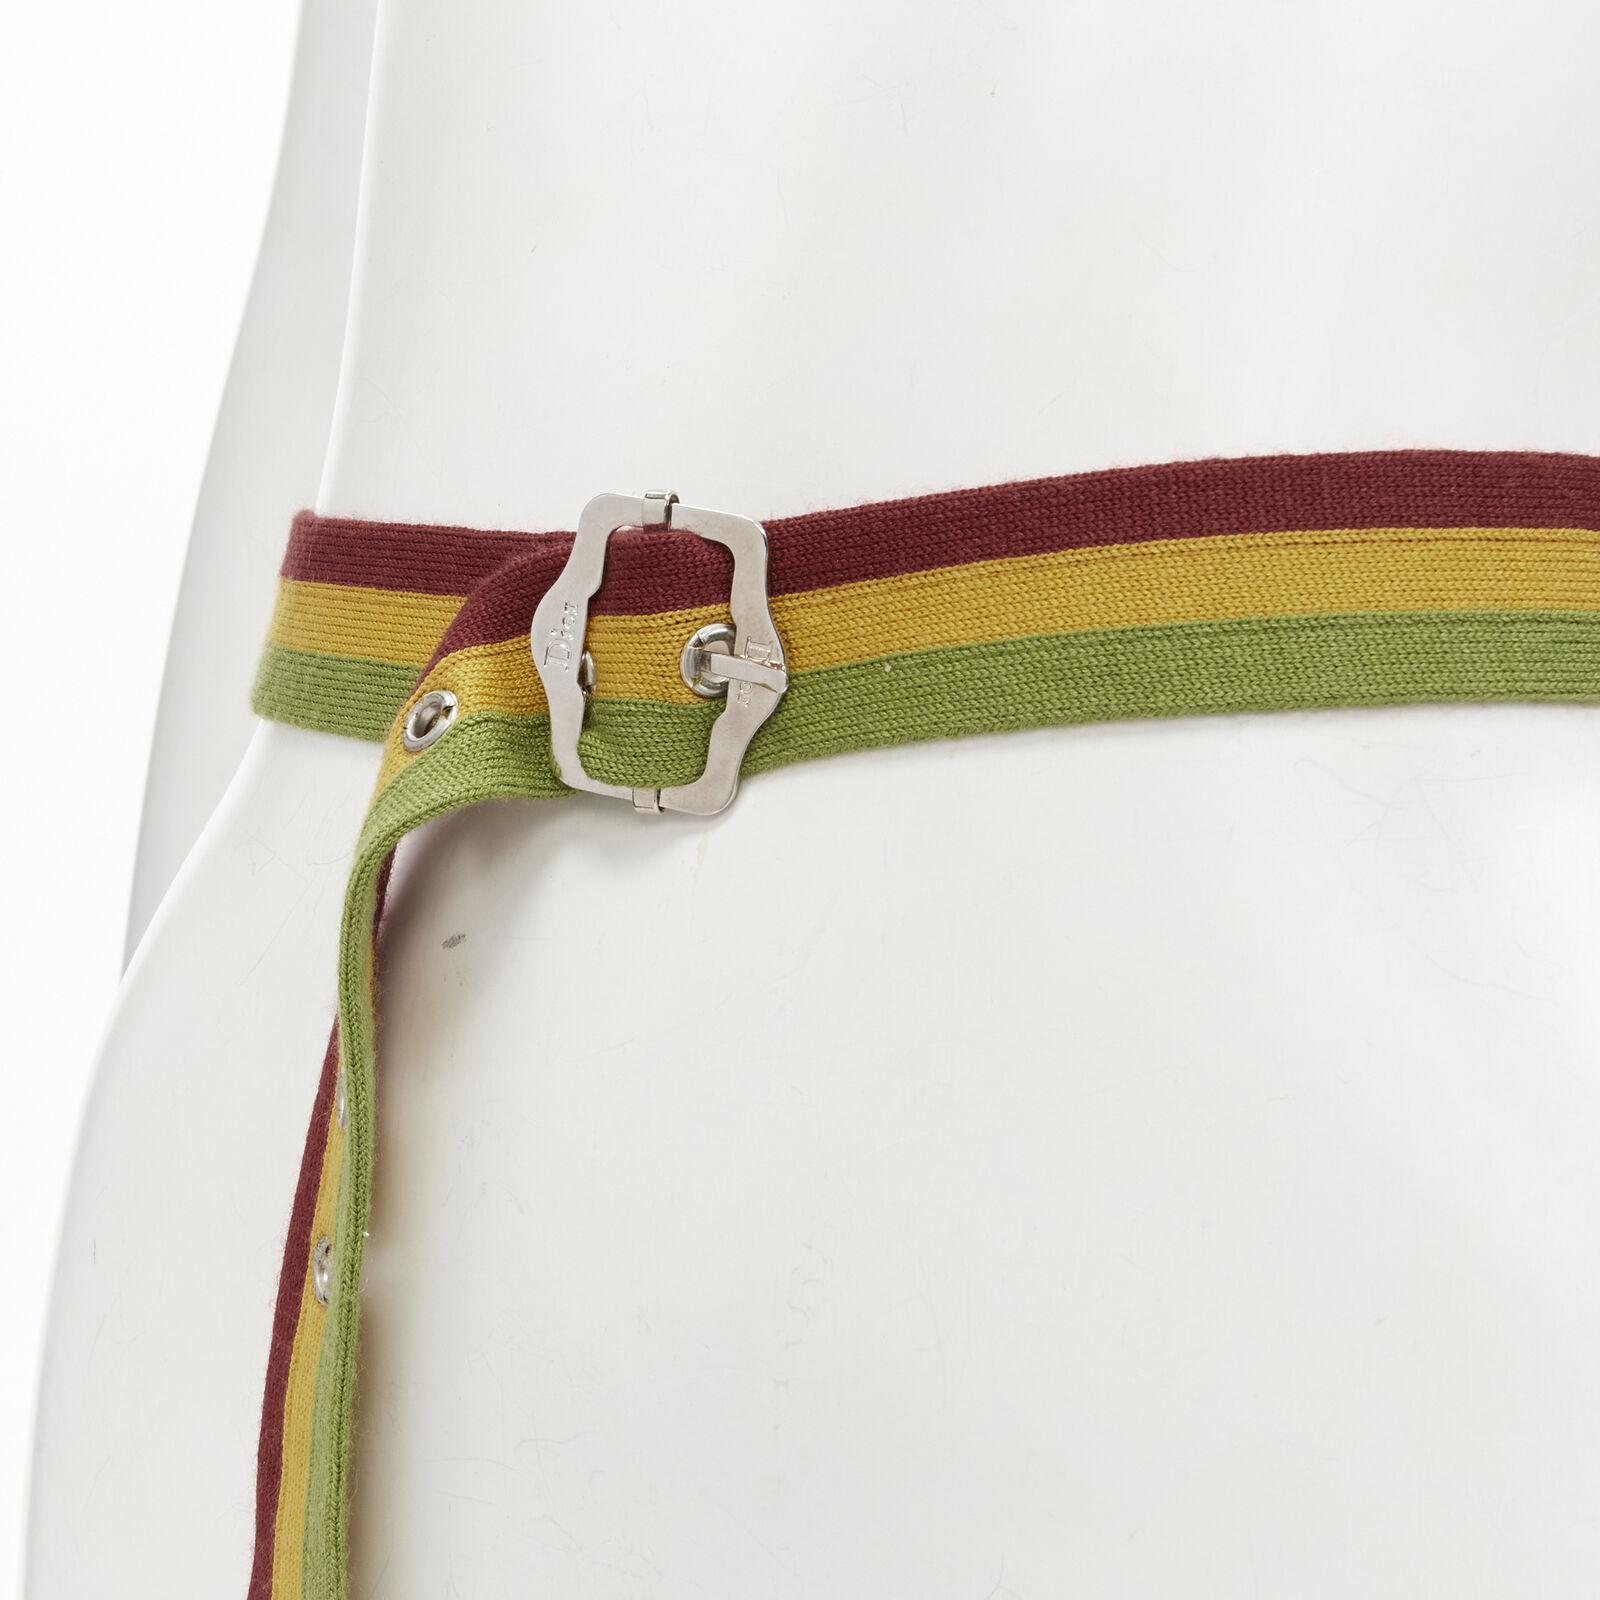 CHRISTIAN DIOR John Galliano Vintage Y2K Rasta red green web CD buckle belt
Reference: ANWU/A00866
Brand: Christian Dior
Designer: John Galliano
Collection: Rasta
Material: Feels like cotton
Color: Red, Yellow
Pattern: Striped
Closure: